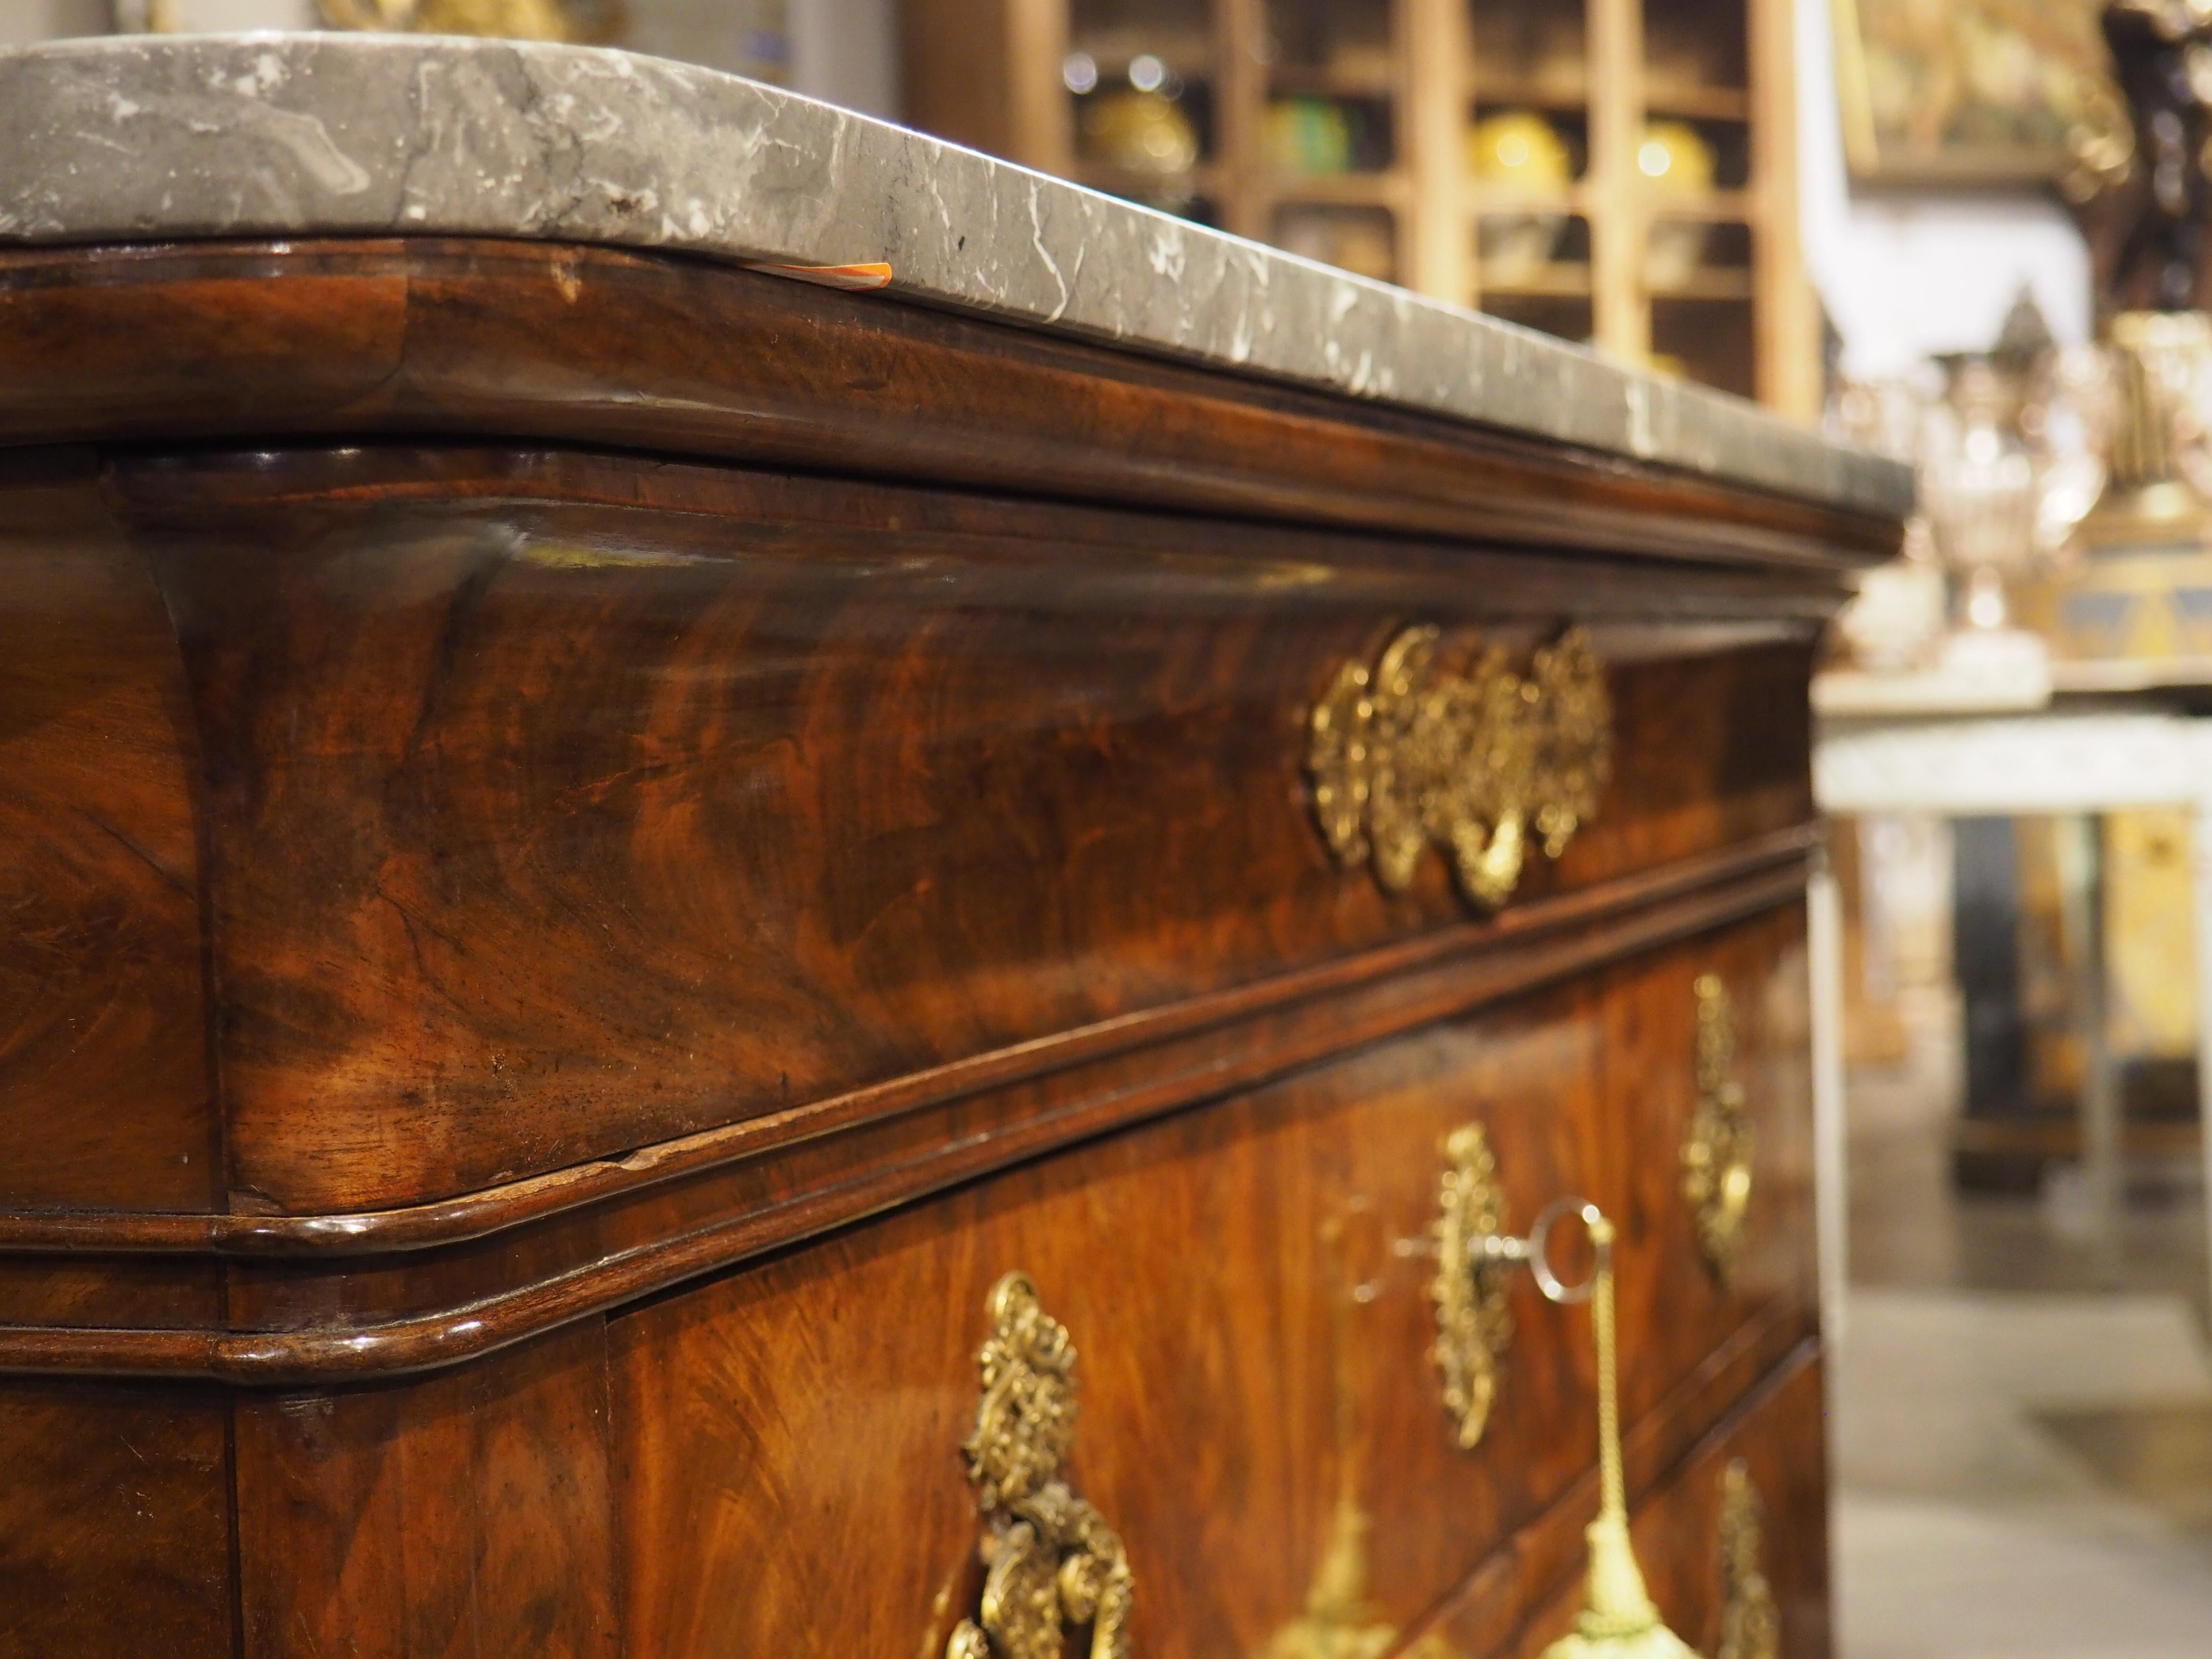 Topped by a one-inch thick marble top, this commode has a beautiful mahogany veneer with flame graining and foliate and floral gilt bronze hardware. Hand-carved in France, circa 1820, the stunning chest of drawers is from the Restauration period,